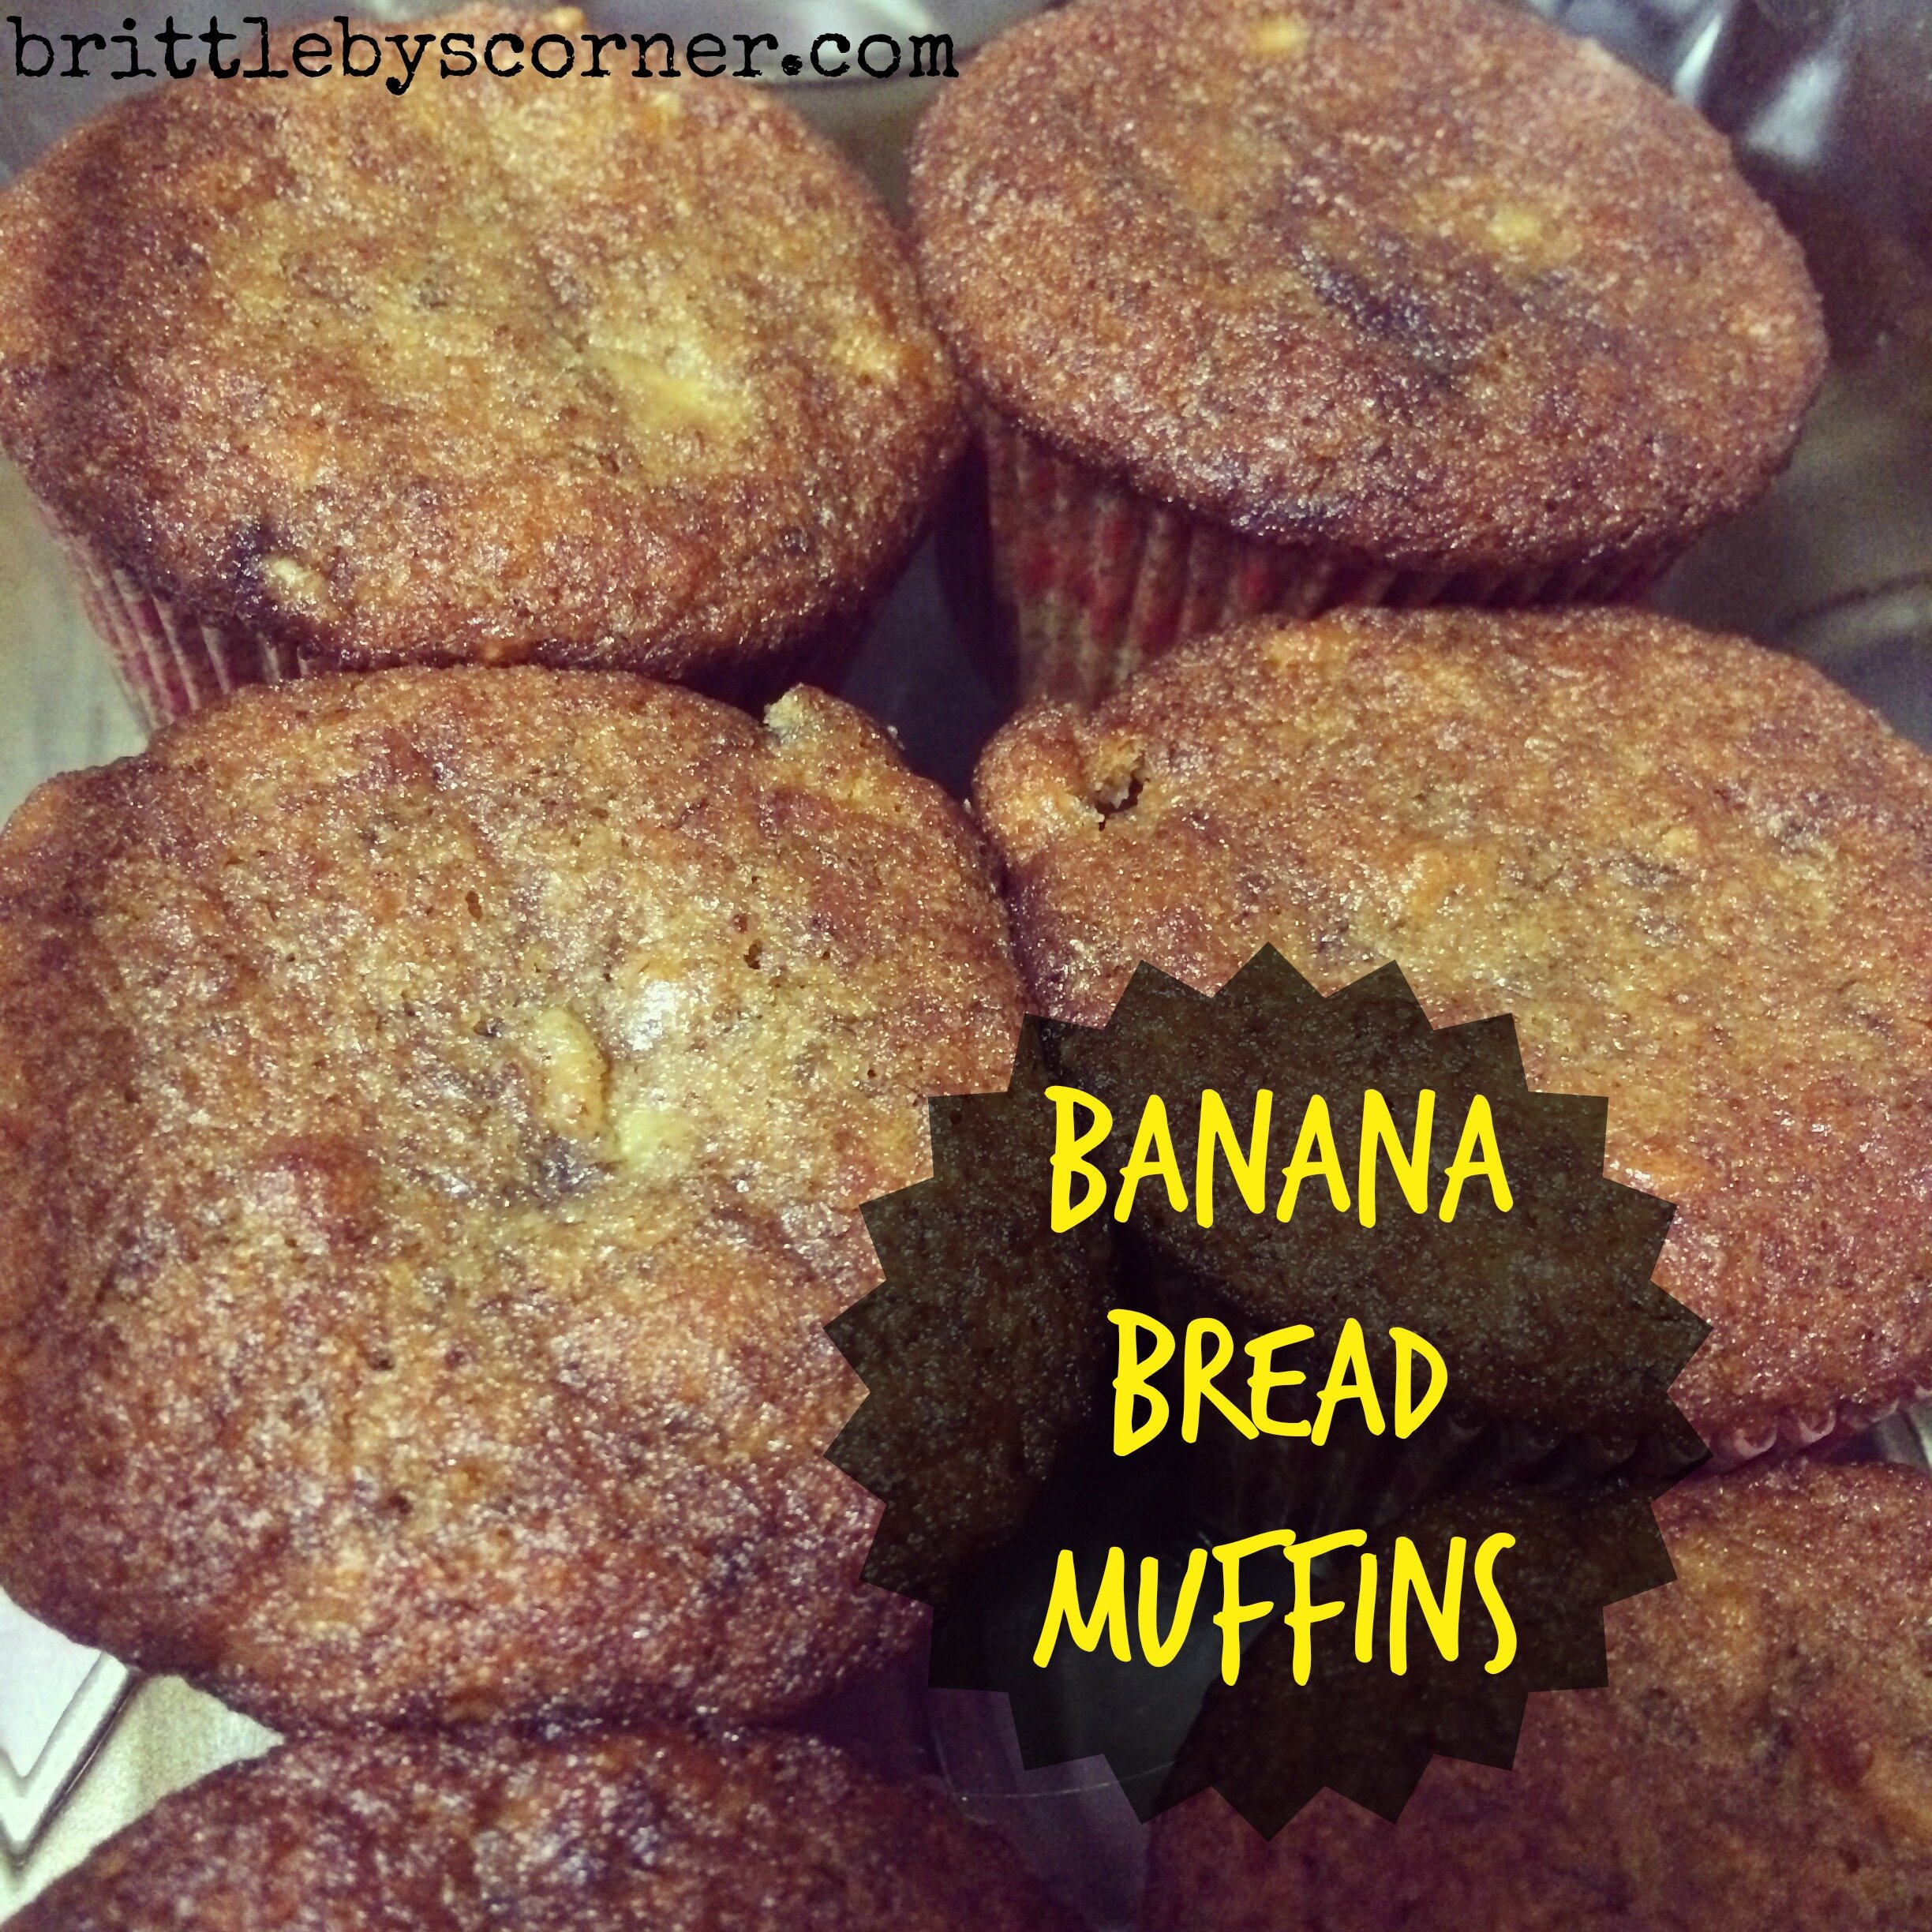 Banana Bread Muffins made with Almond Flour